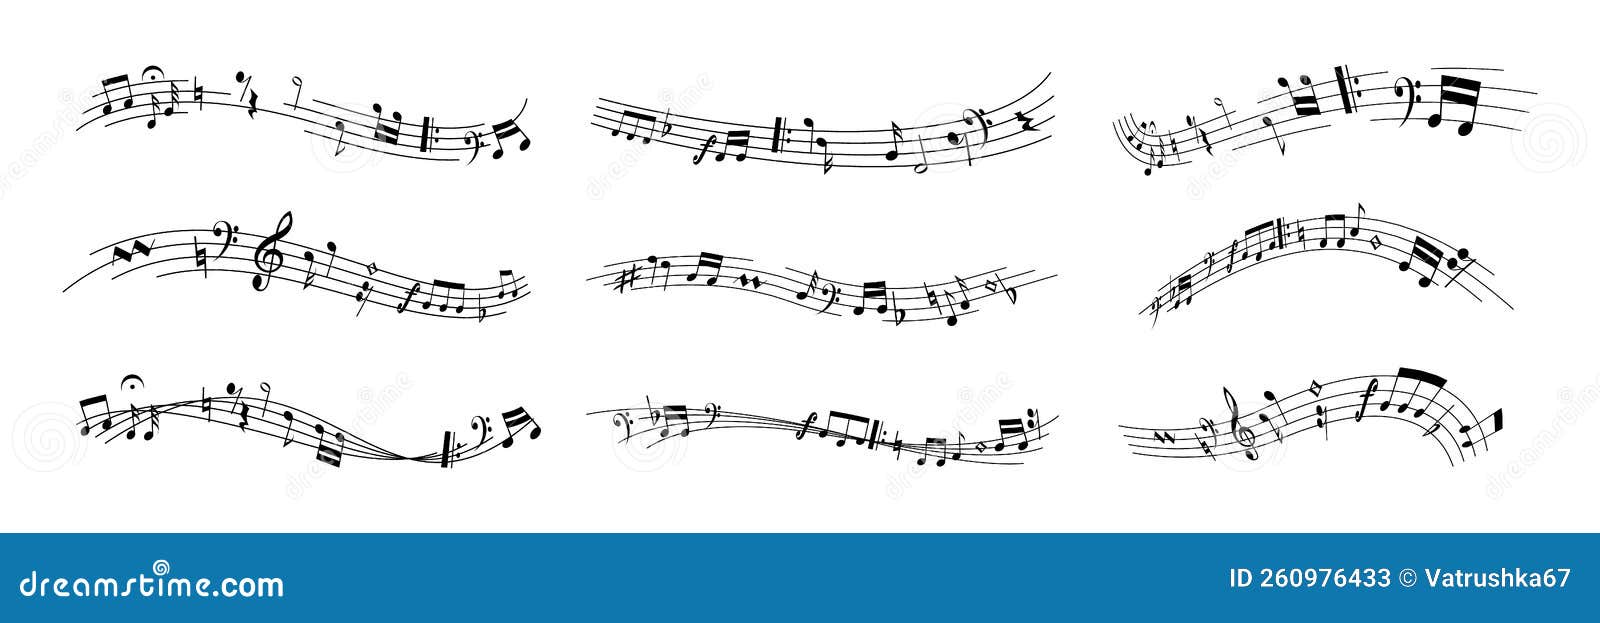 music notes decoration. doodle melody tune key s flowing on chords, rows of musical crotchets with curves and